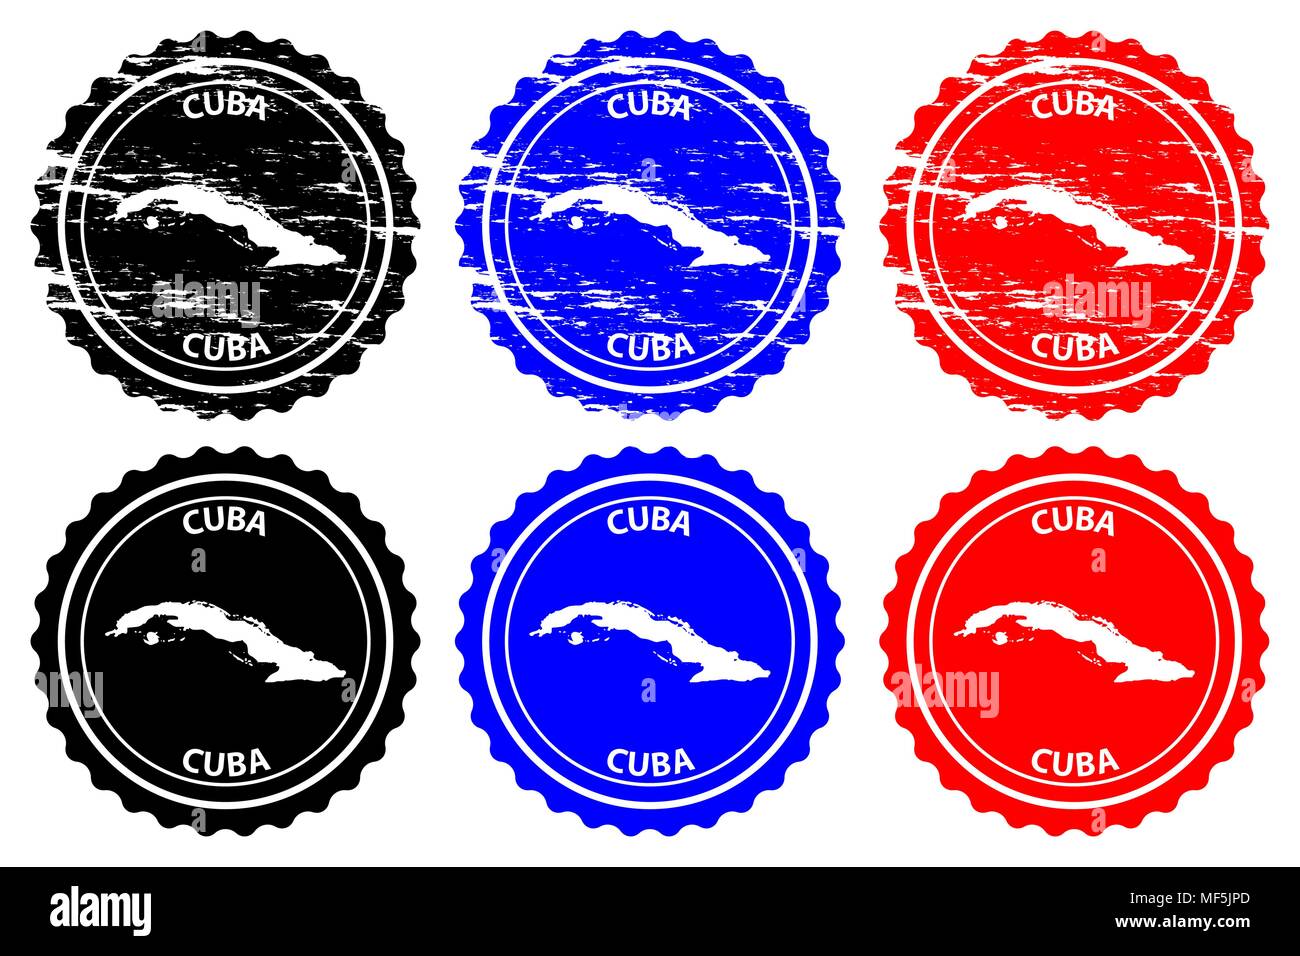 Cuba - rubber stamp - vector, Cuba map pattern - sticker - black, blue and red Stock Vector